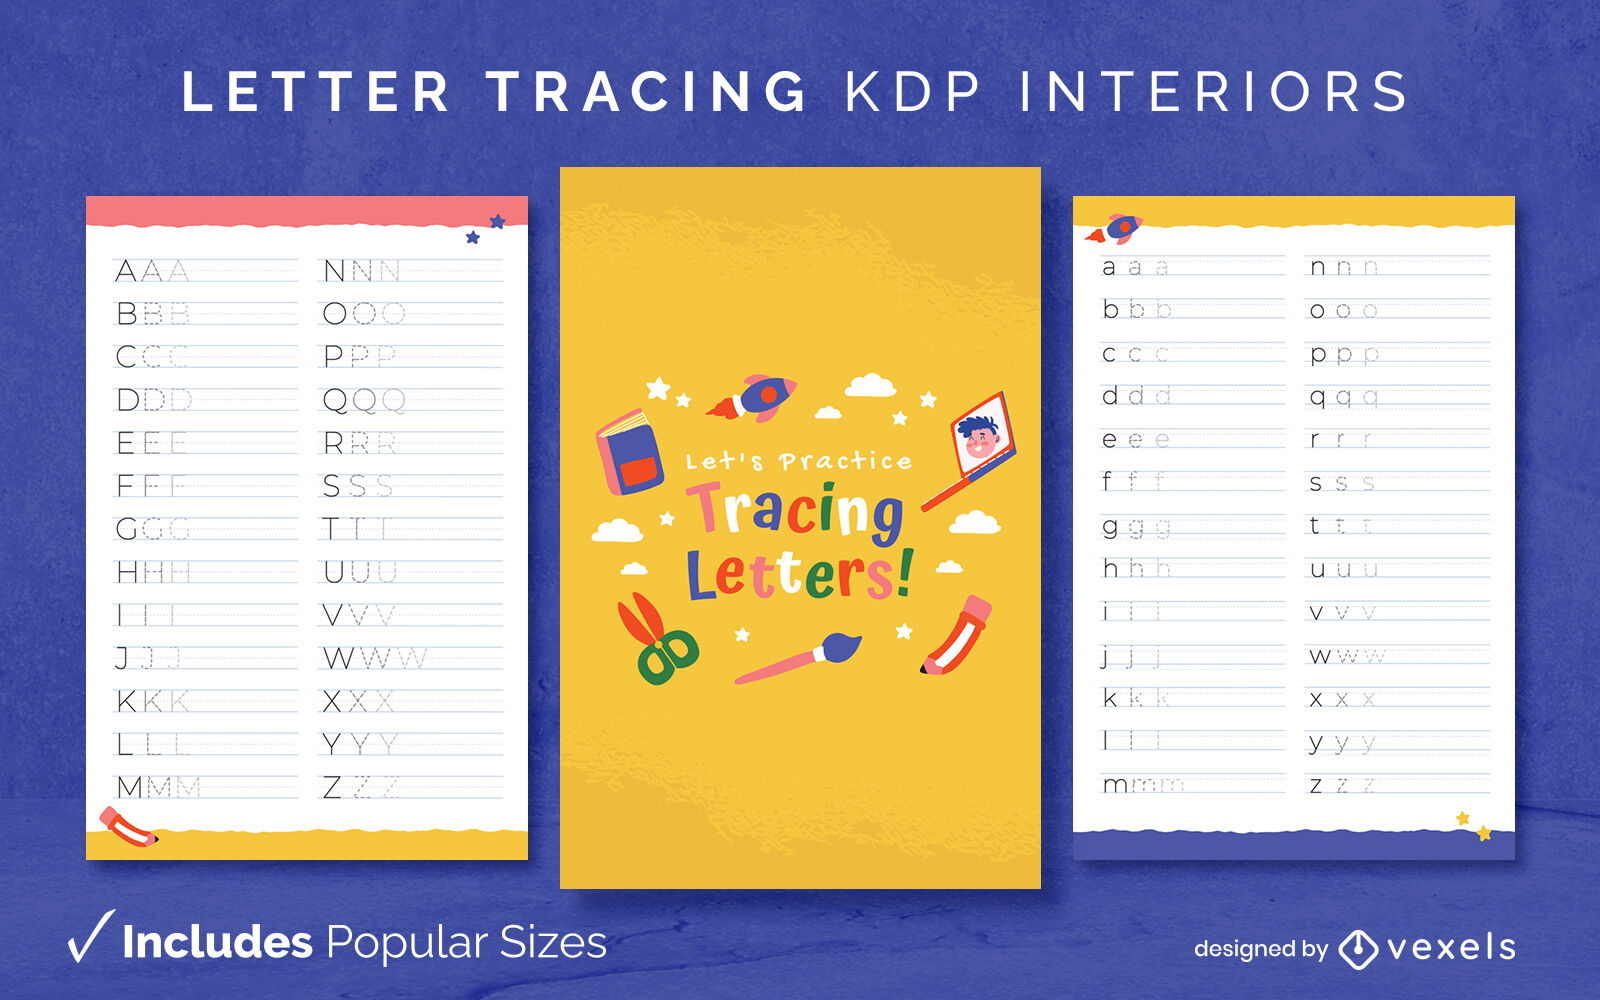 KDP Interior Template - Letter Tracing Book (FREE)